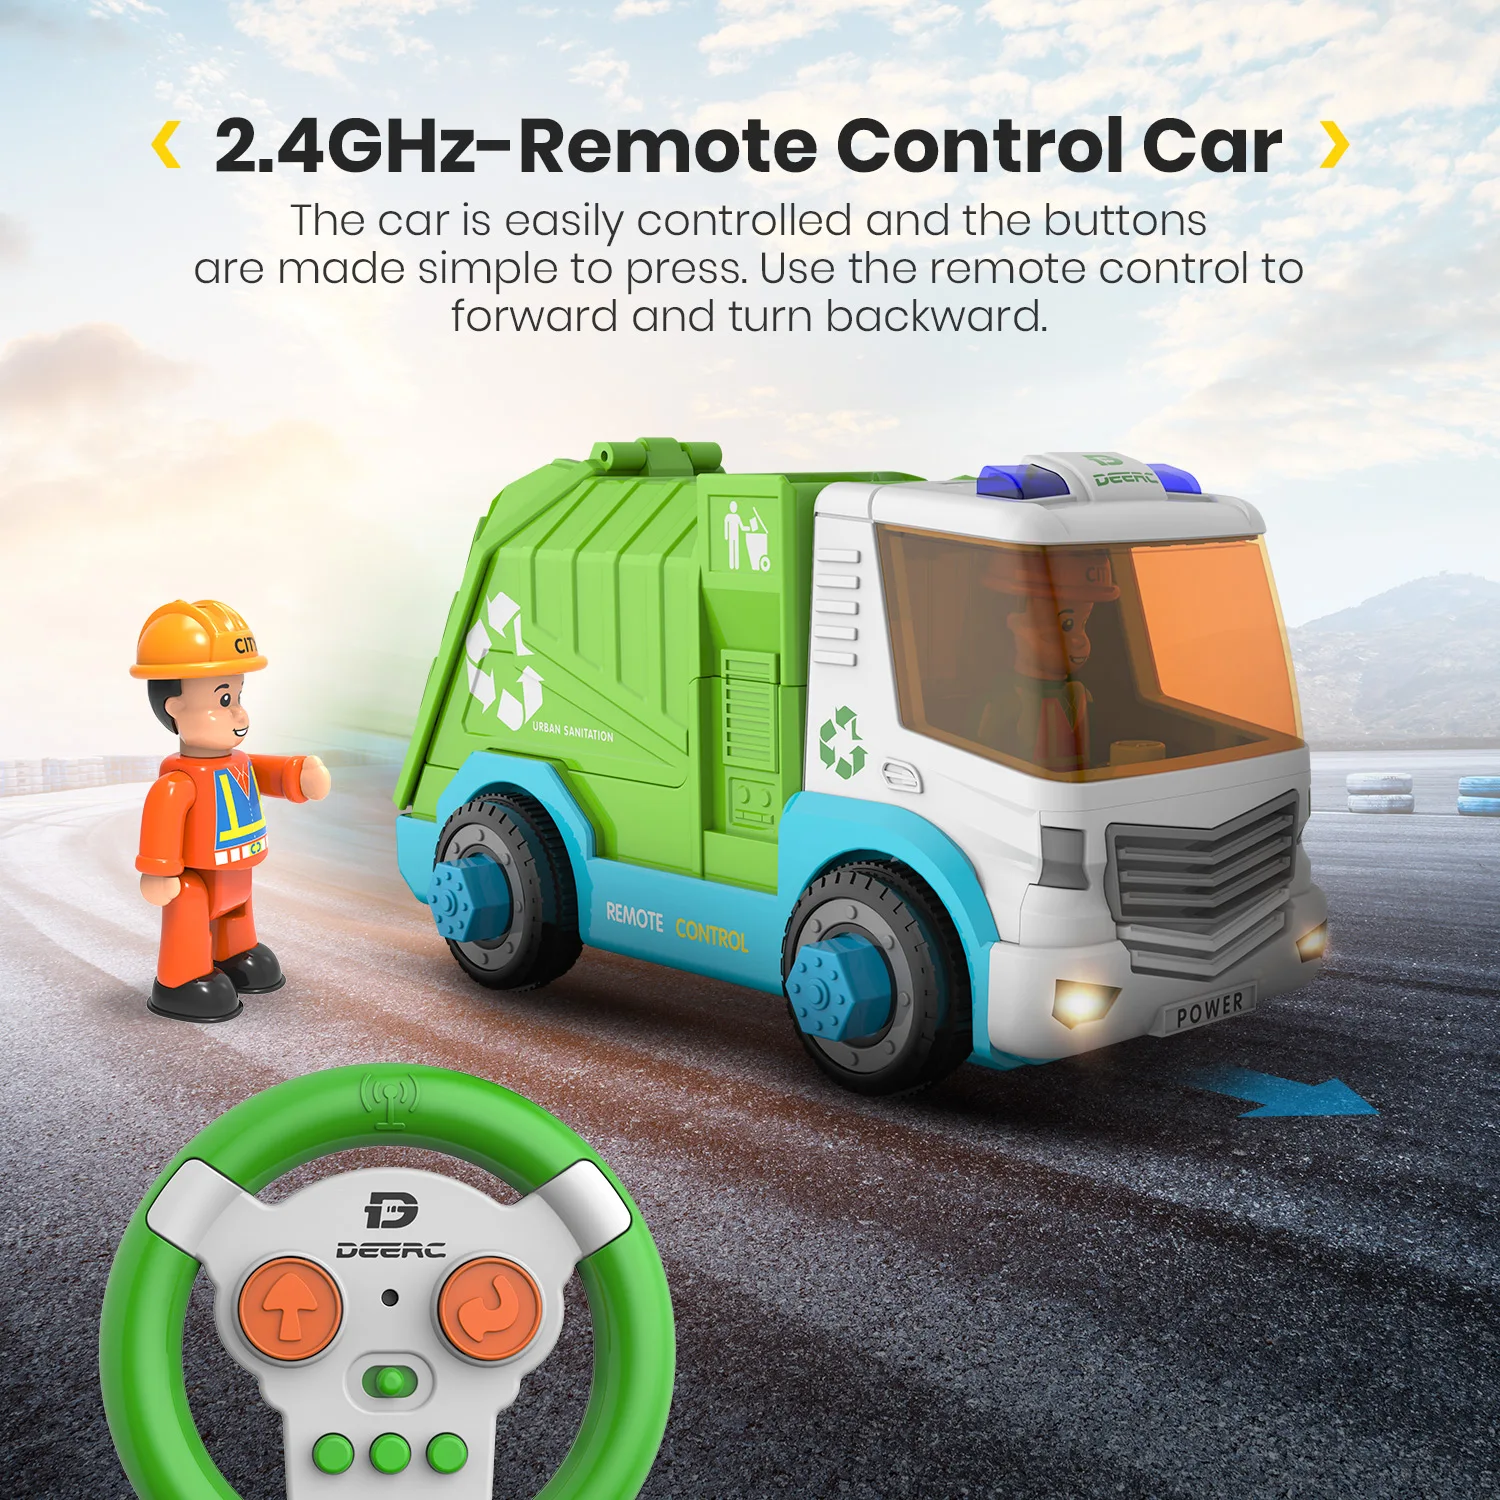 DEERC RC Car Sanitation Rubbish Garbage Truck Disassembly oys Tool Cars Remote Control Trucks for Children Boys Kids Assemble